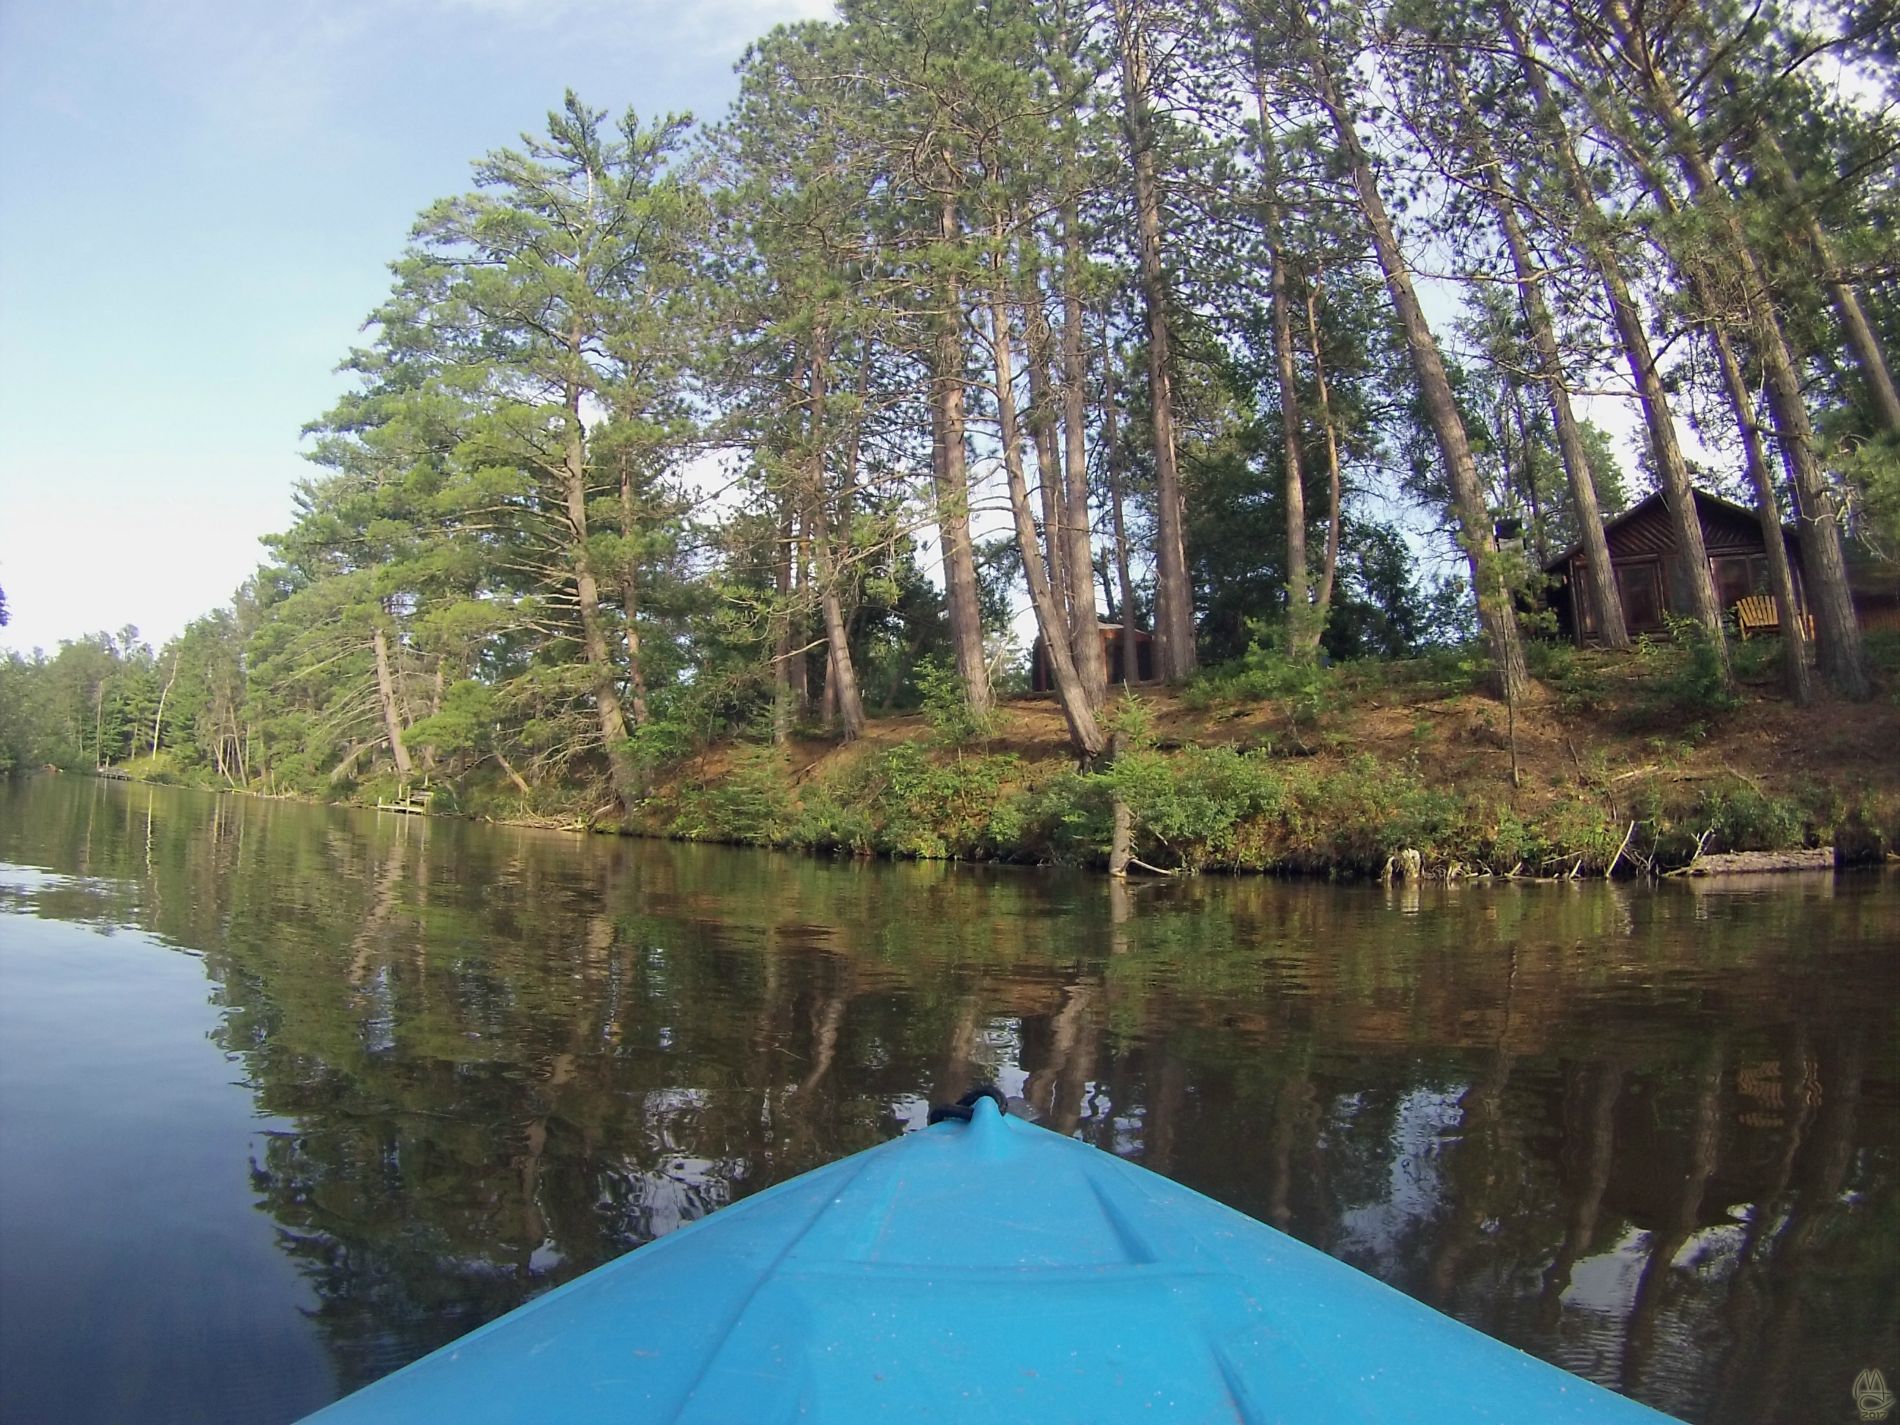 Watch a time-lapse video of a typical day's canoe traffic.